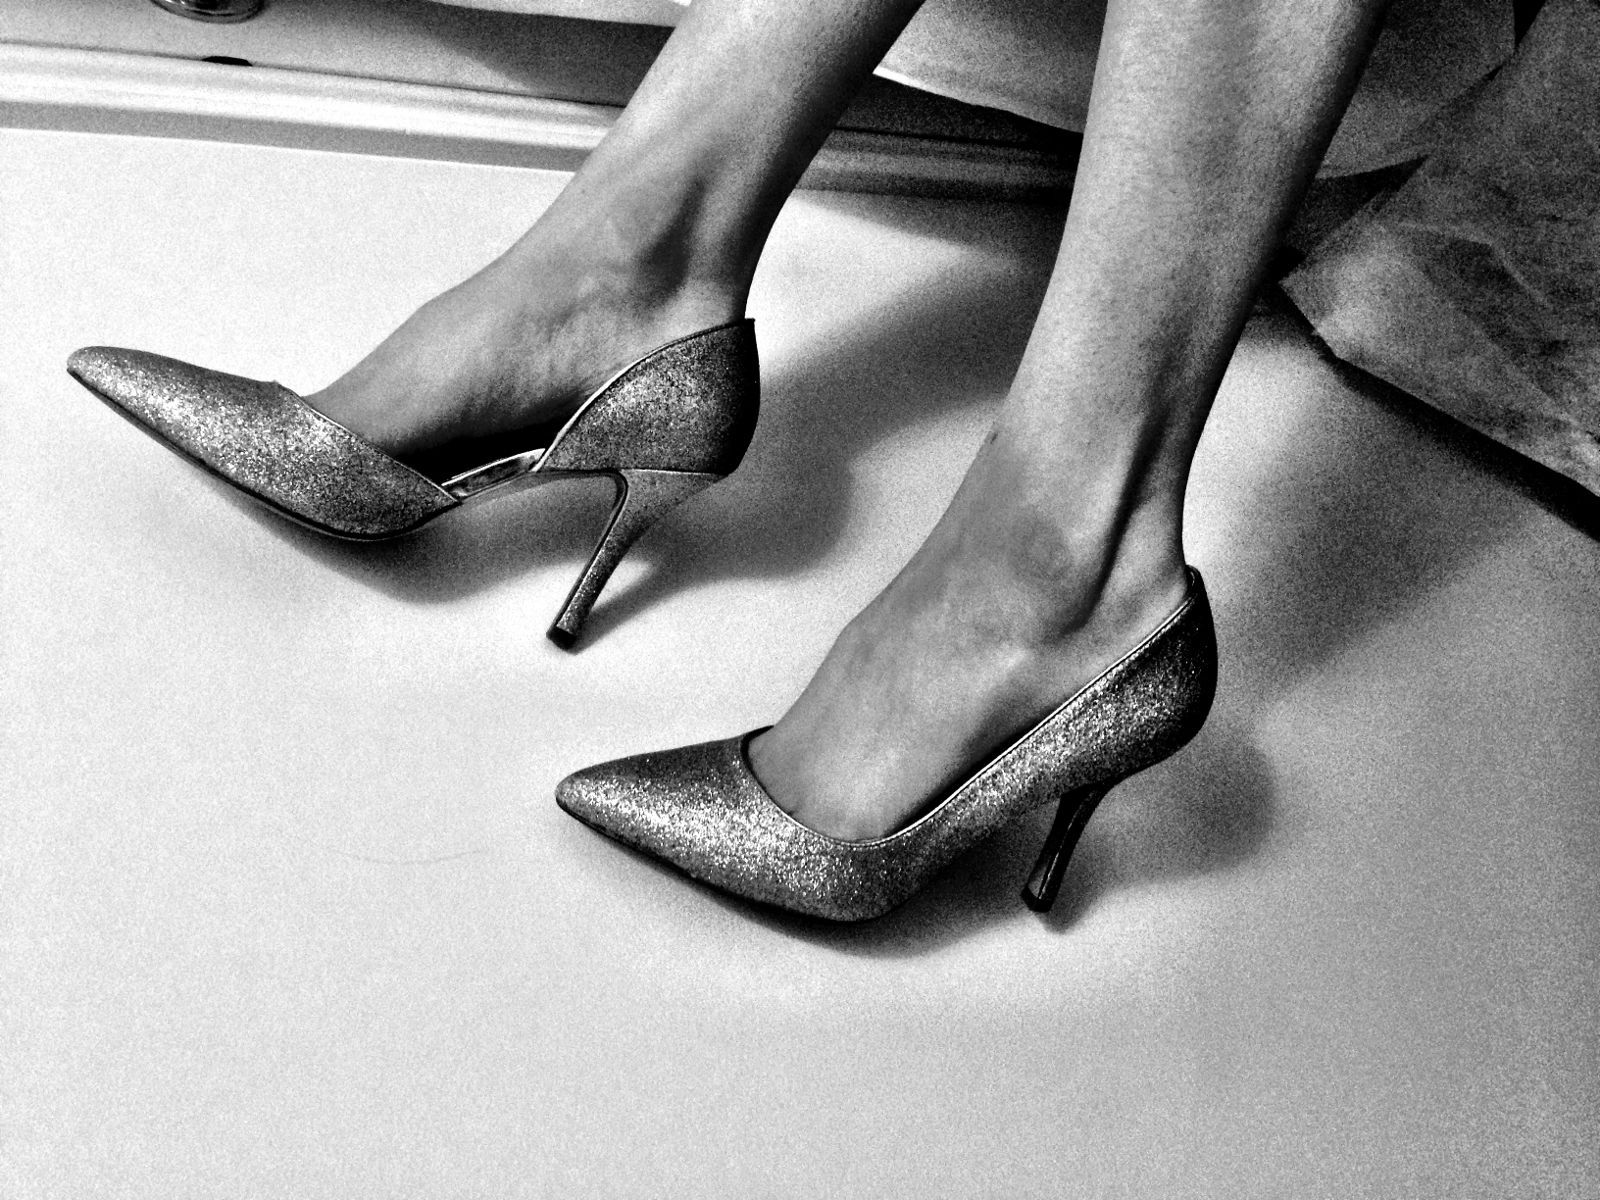 Woman Black And White Shoes Wallpaper.com. Best High Quality Wallpaper